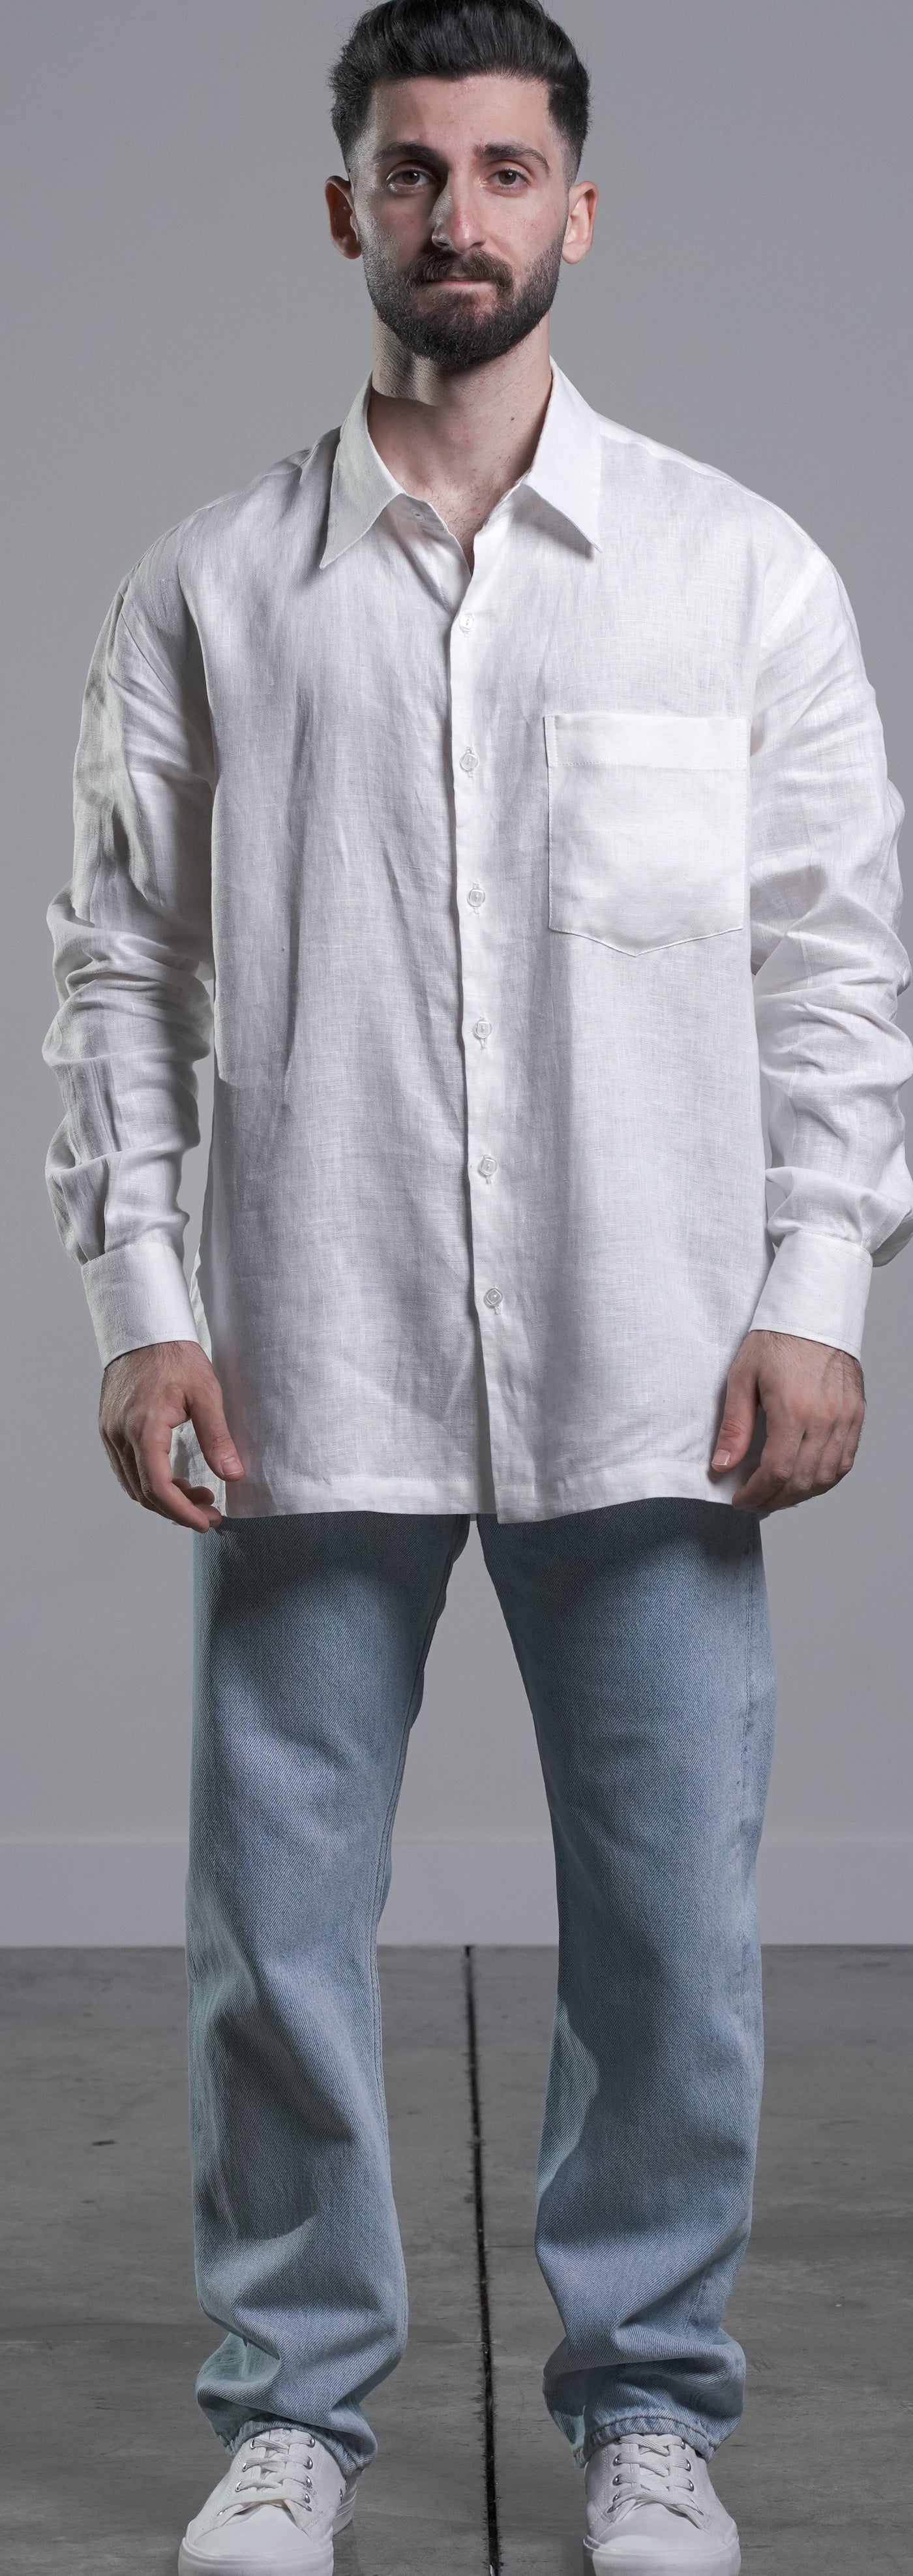 White Linen Shirt with pocket